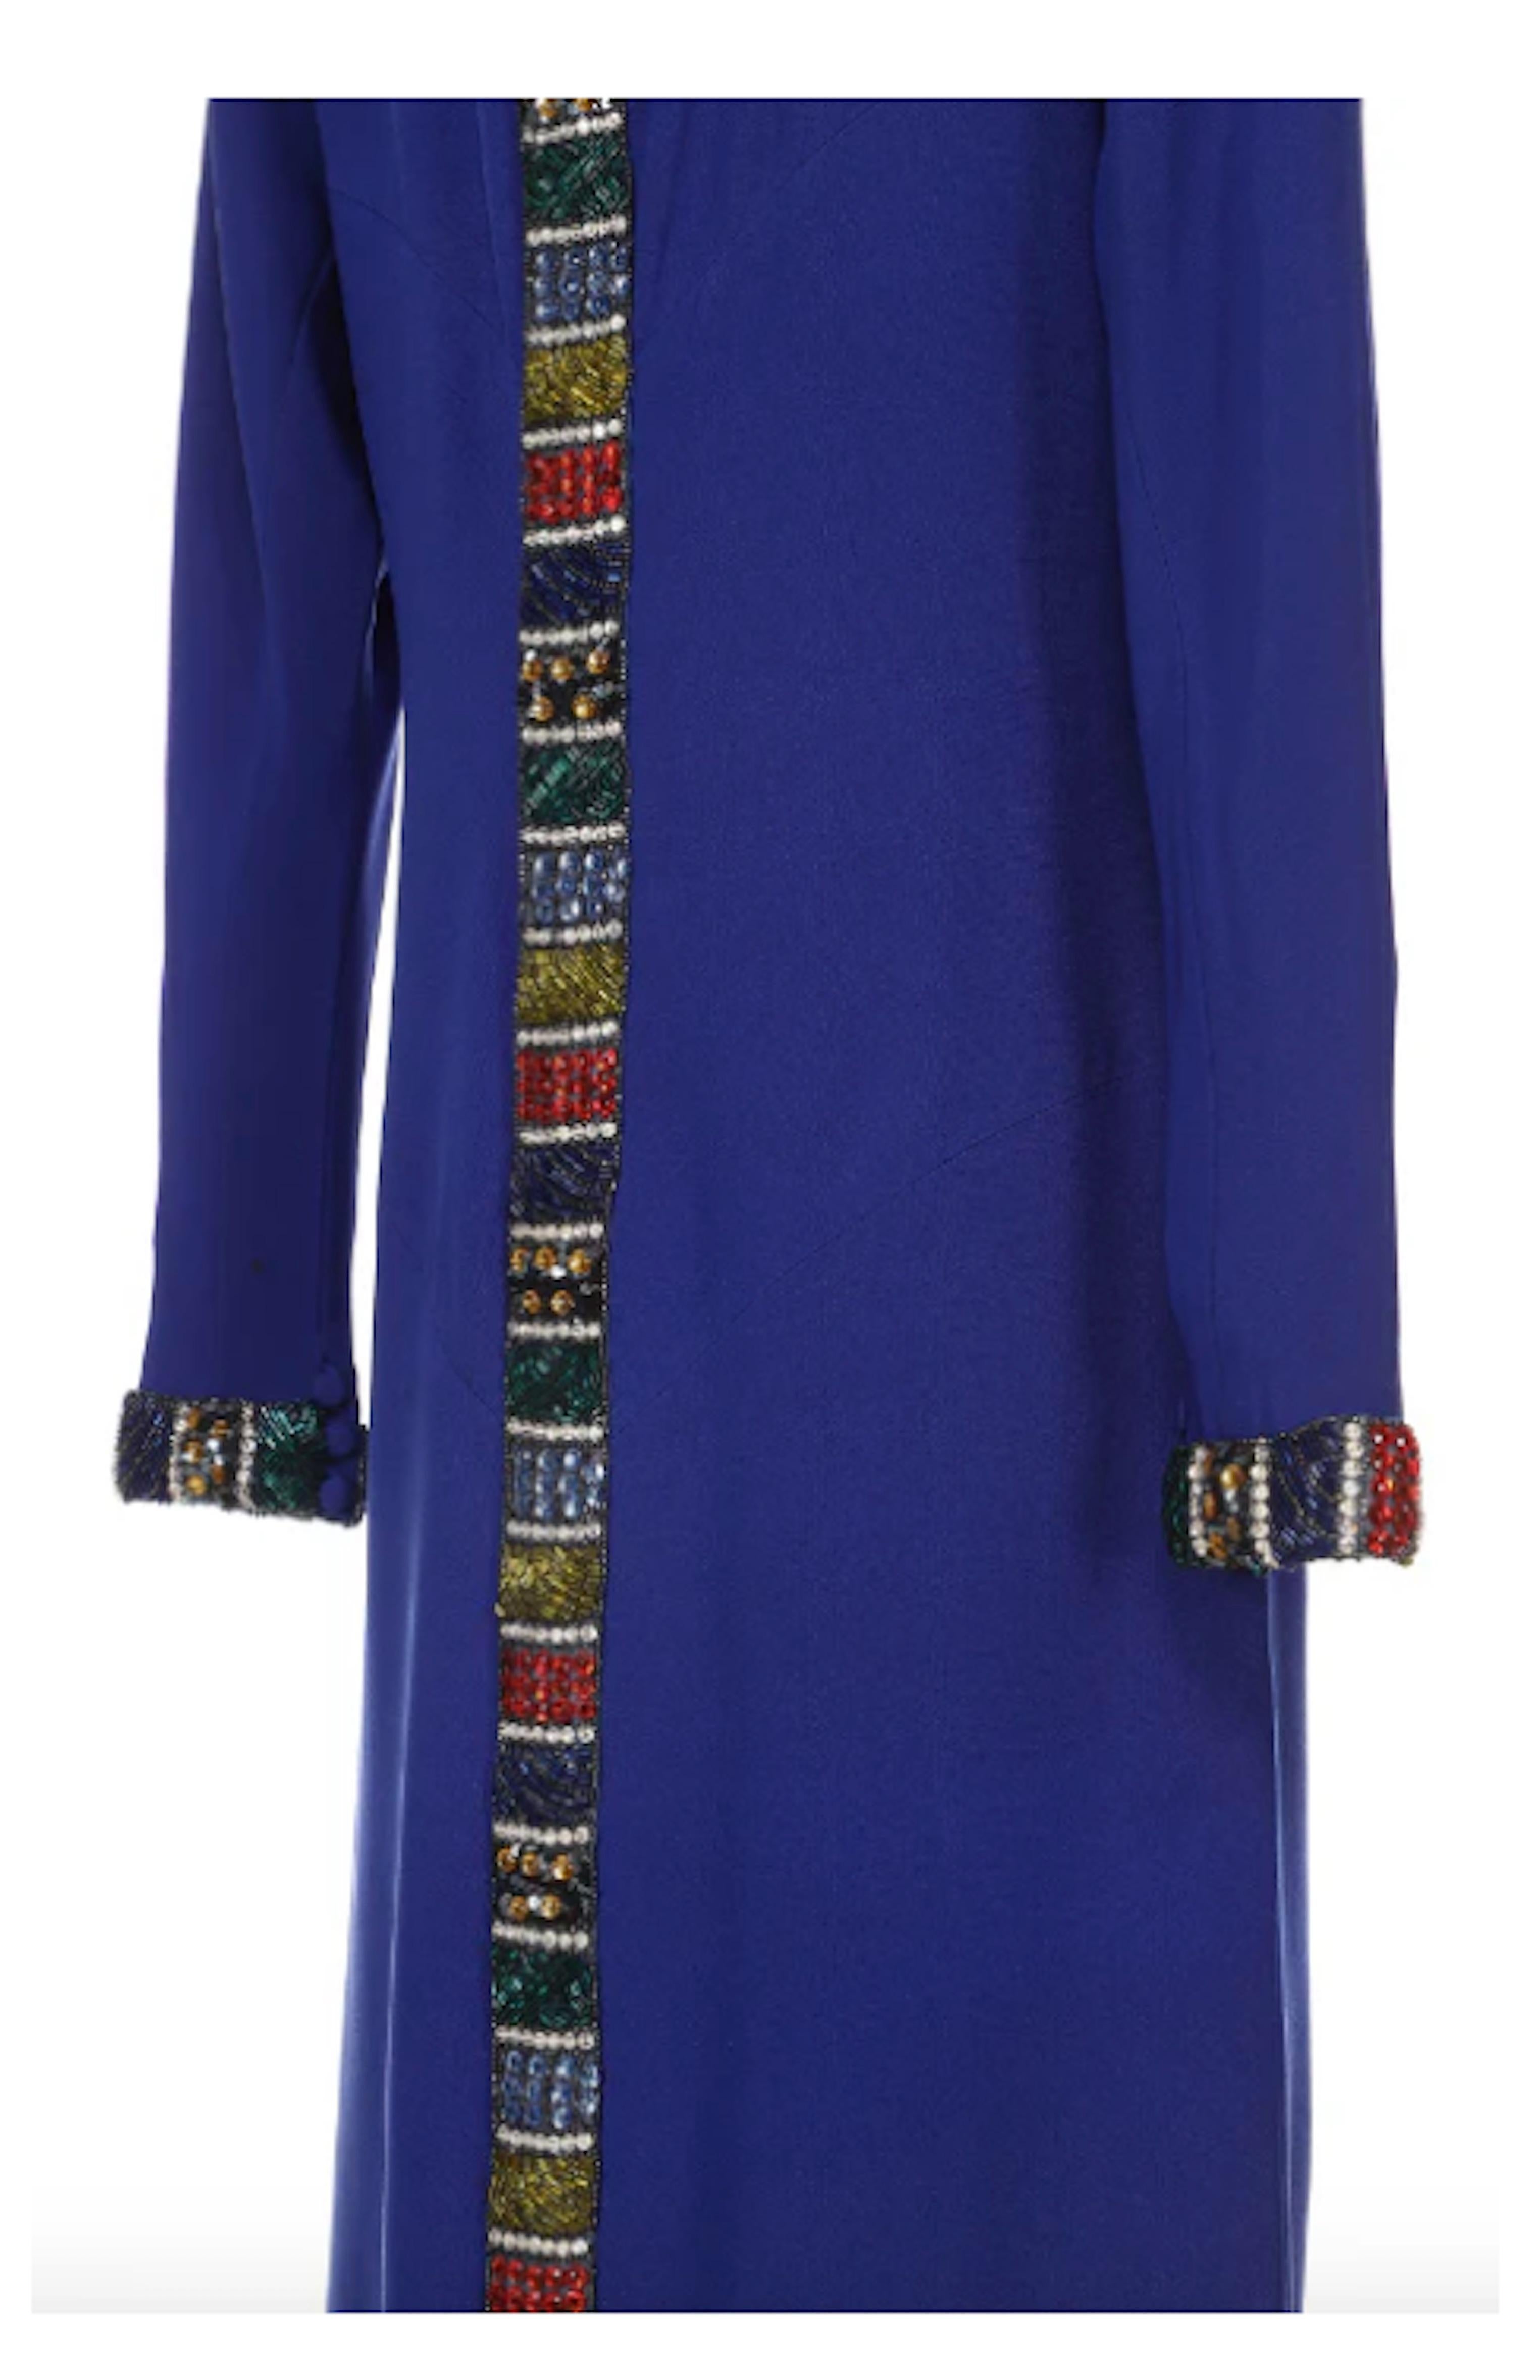 Chloé by Karl Lagerfeld Blue Long Sleeve Dress With Multi Color Sequin  In Excellent Condition For Sale In New York, NY